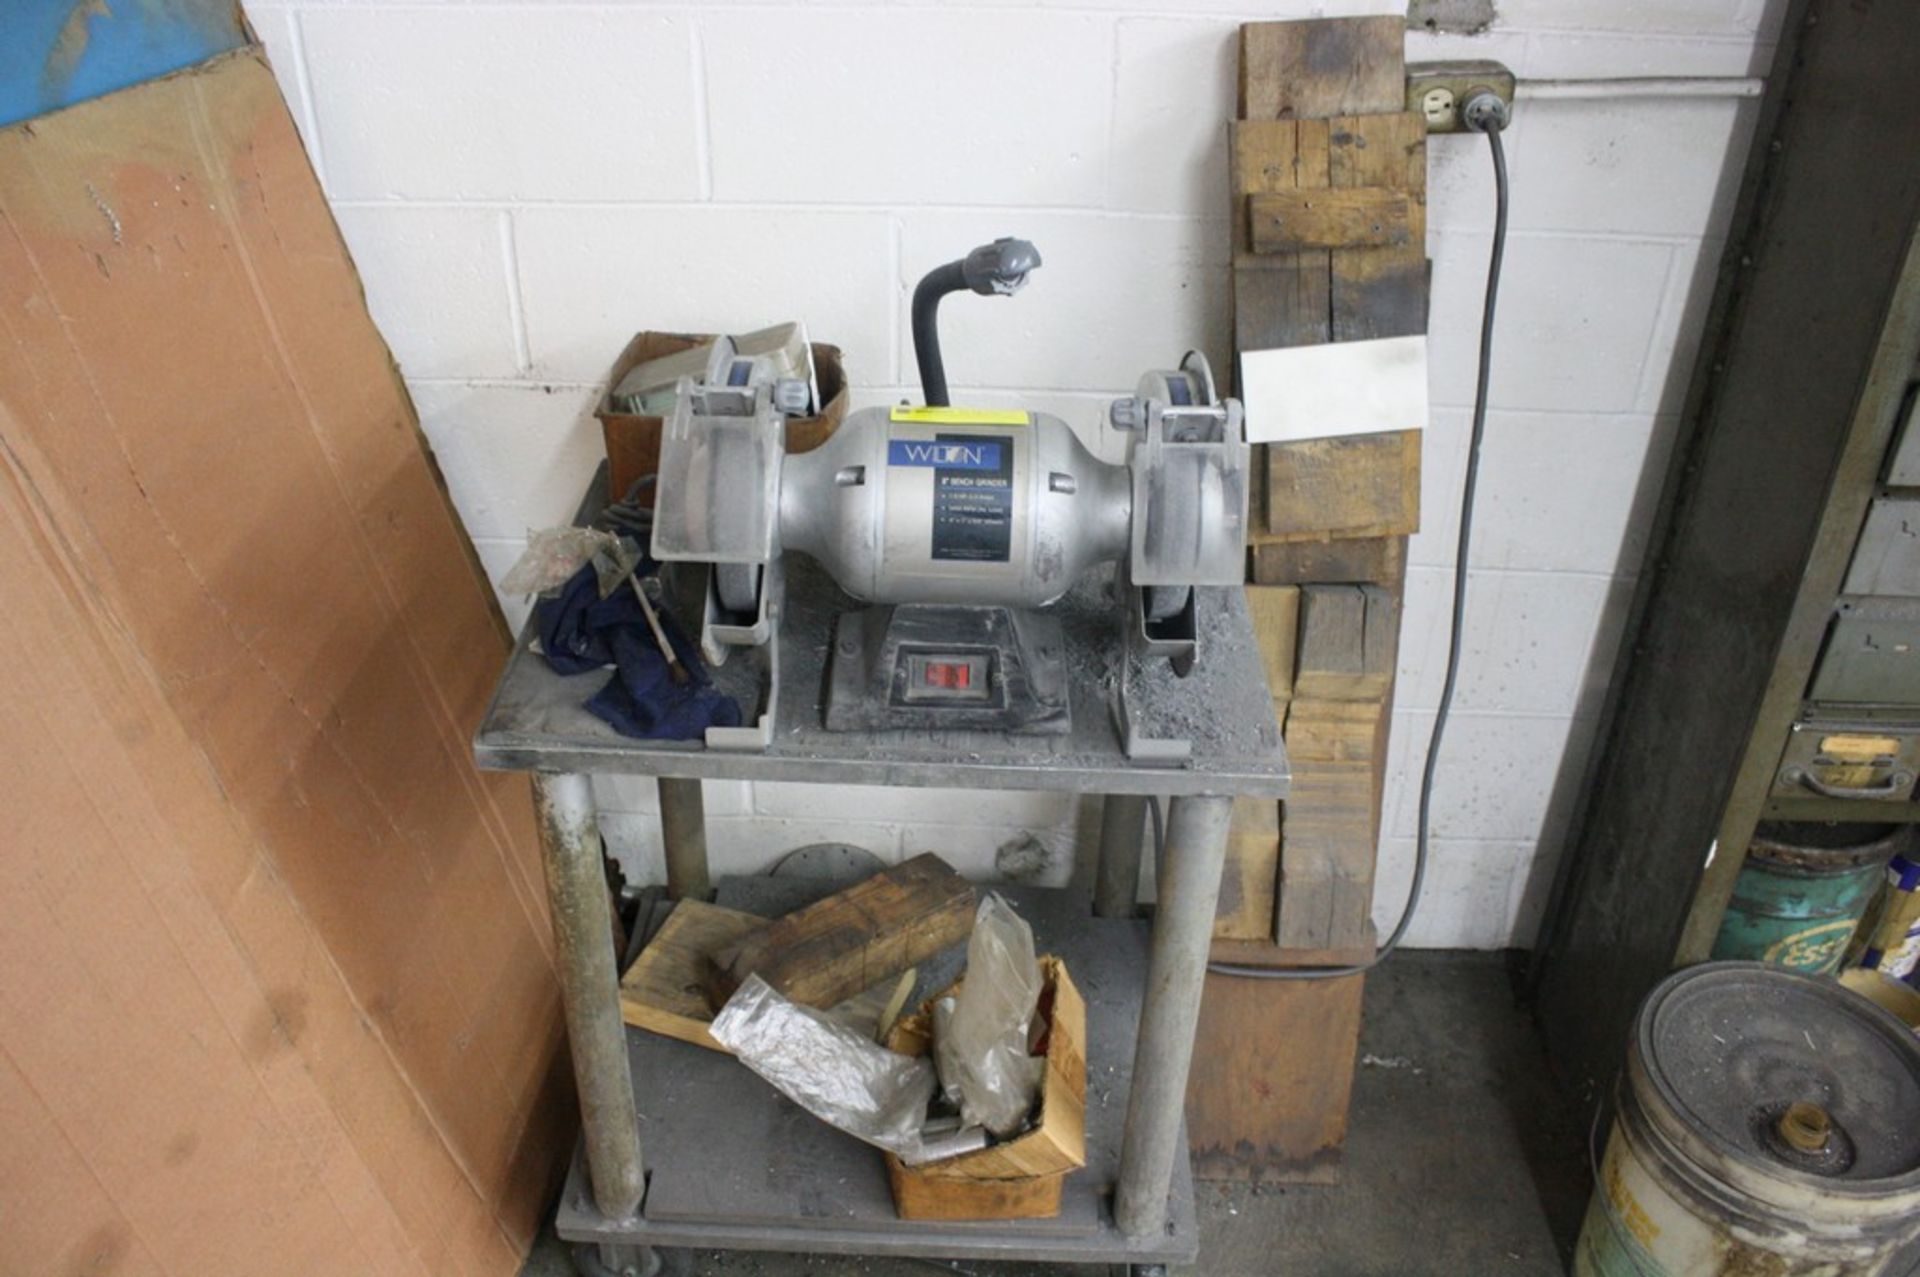 WILTON 8" DOUBLE END BENCH GRINDER